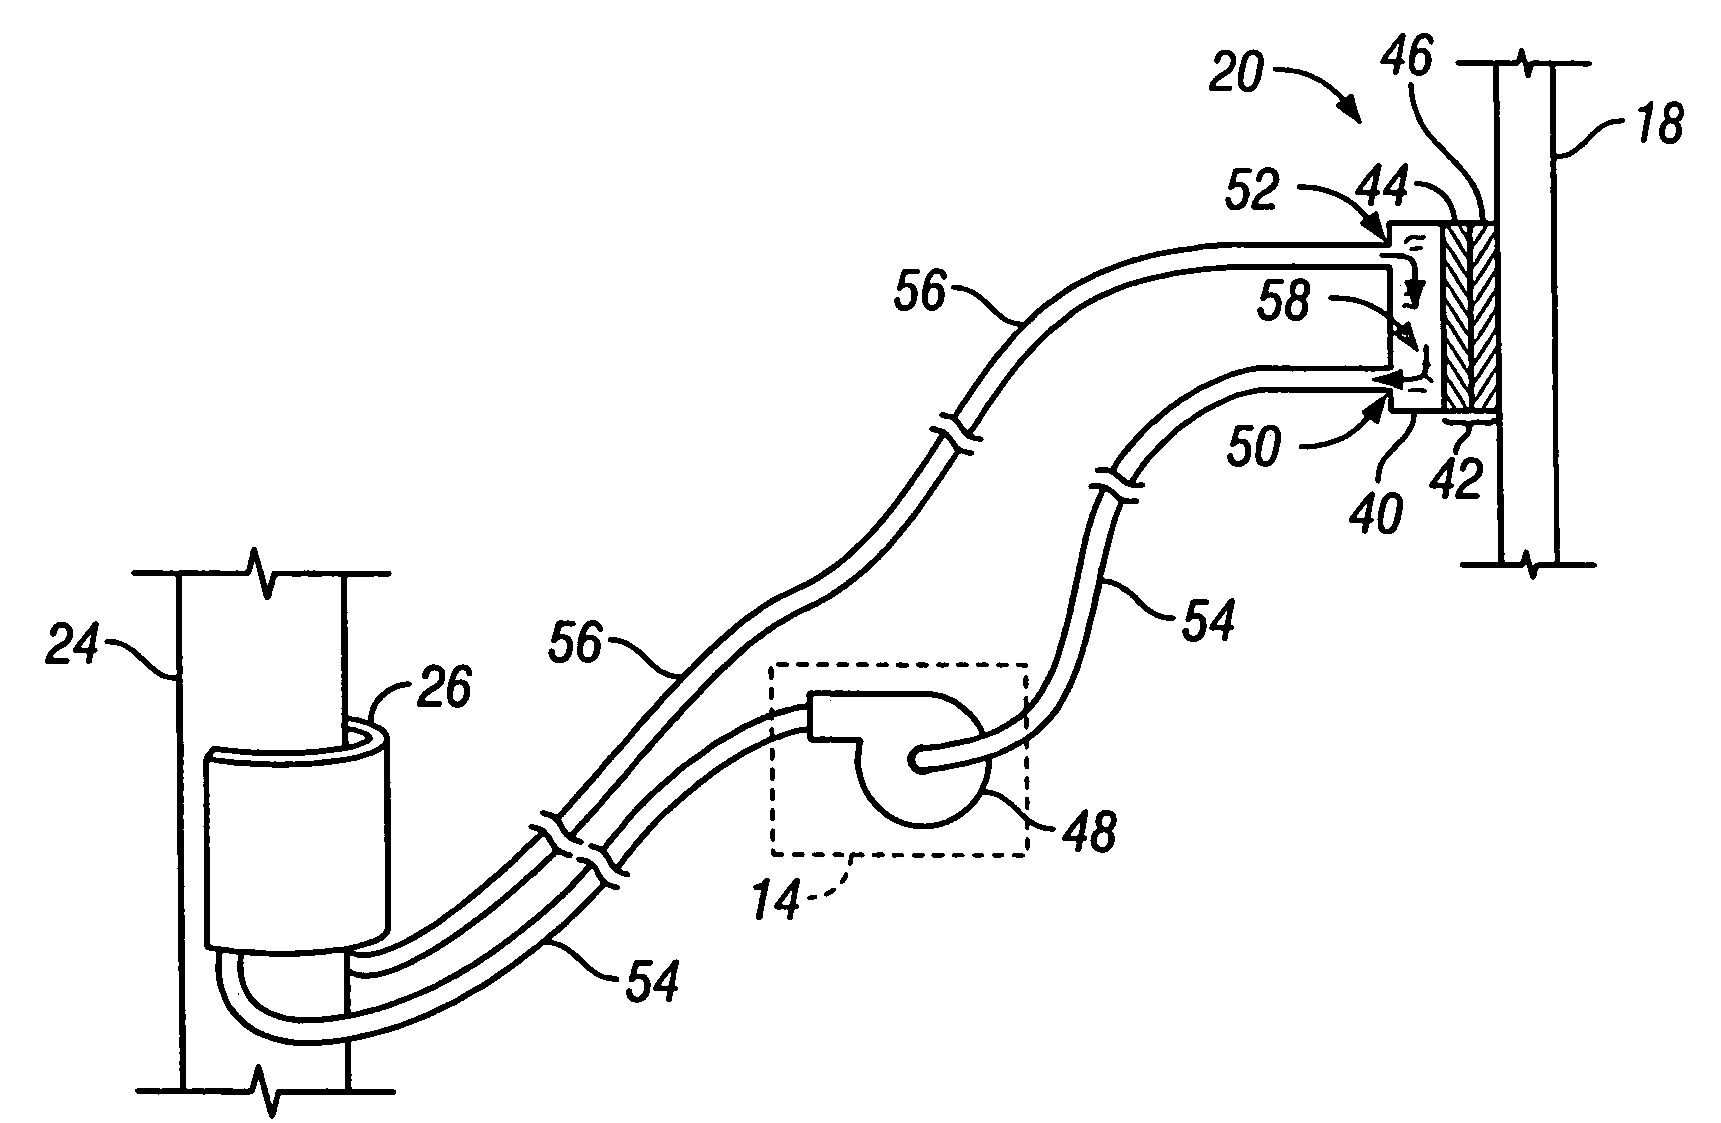 Apparatus and methods for cooling a region within the body